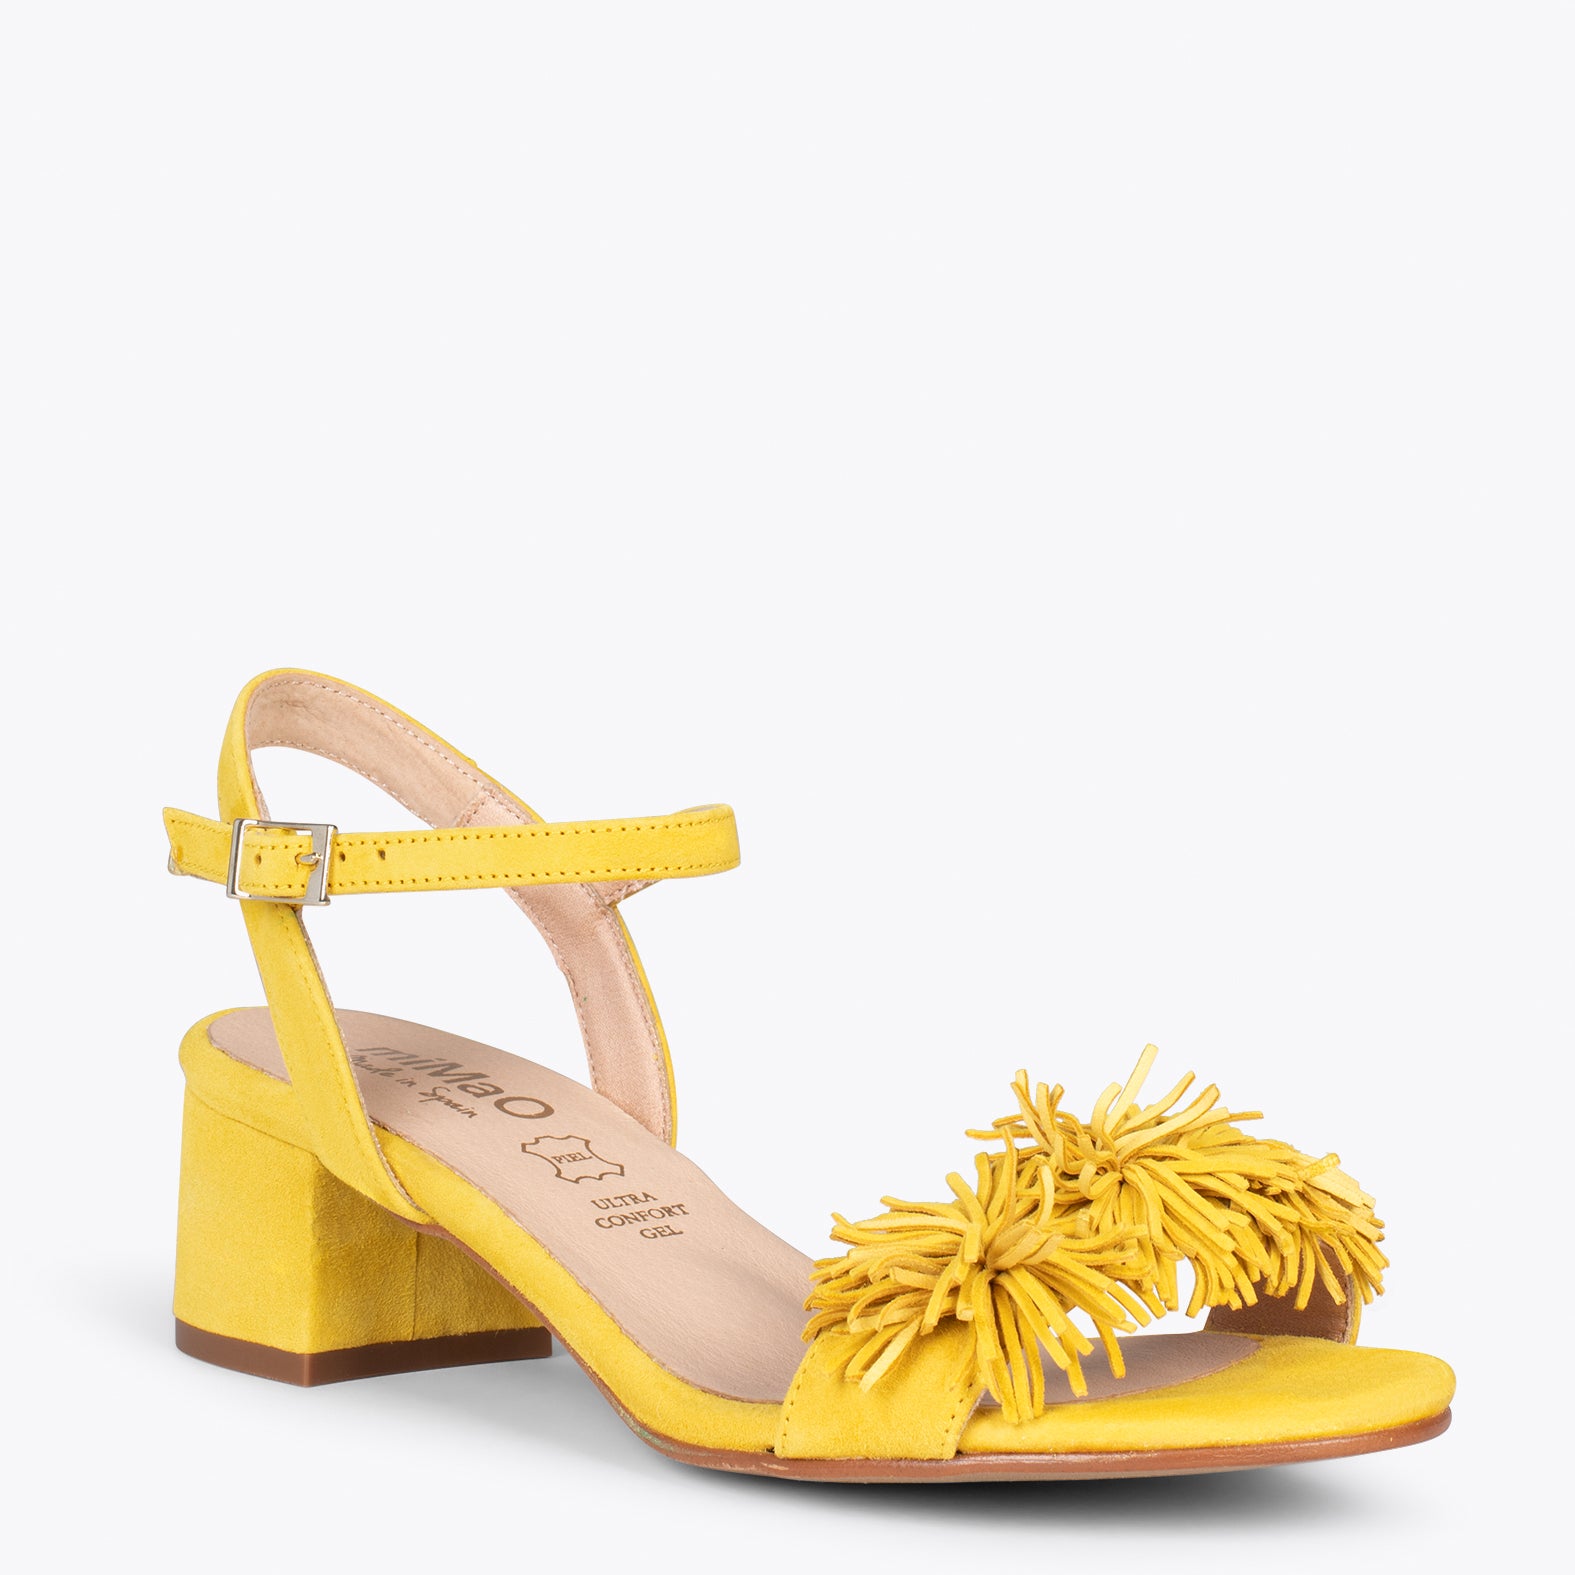 ZINNIA – YELLOW sandals with pompom details